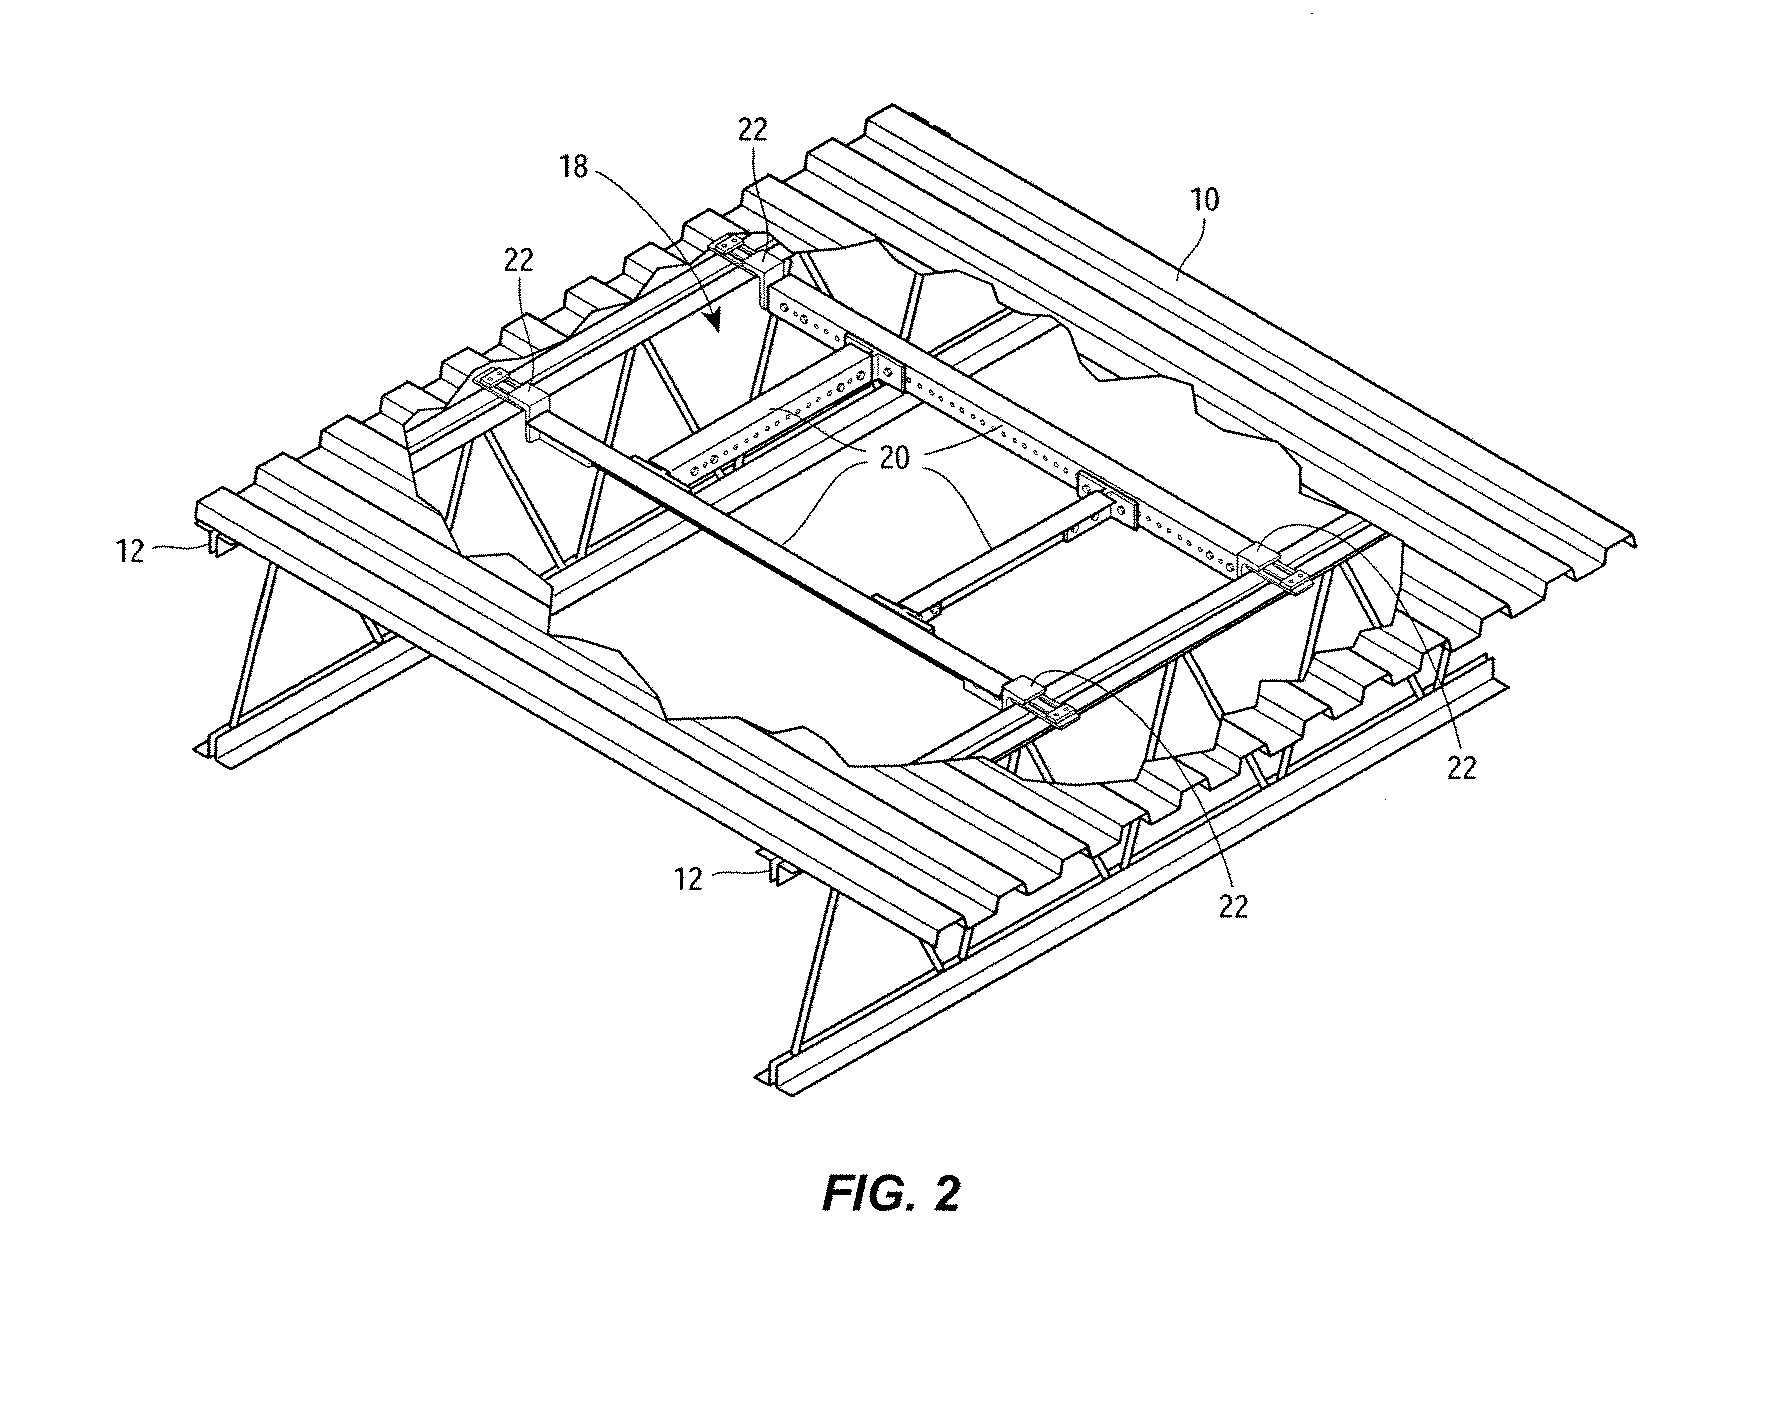 Clamp for use with metal bar joists and beams